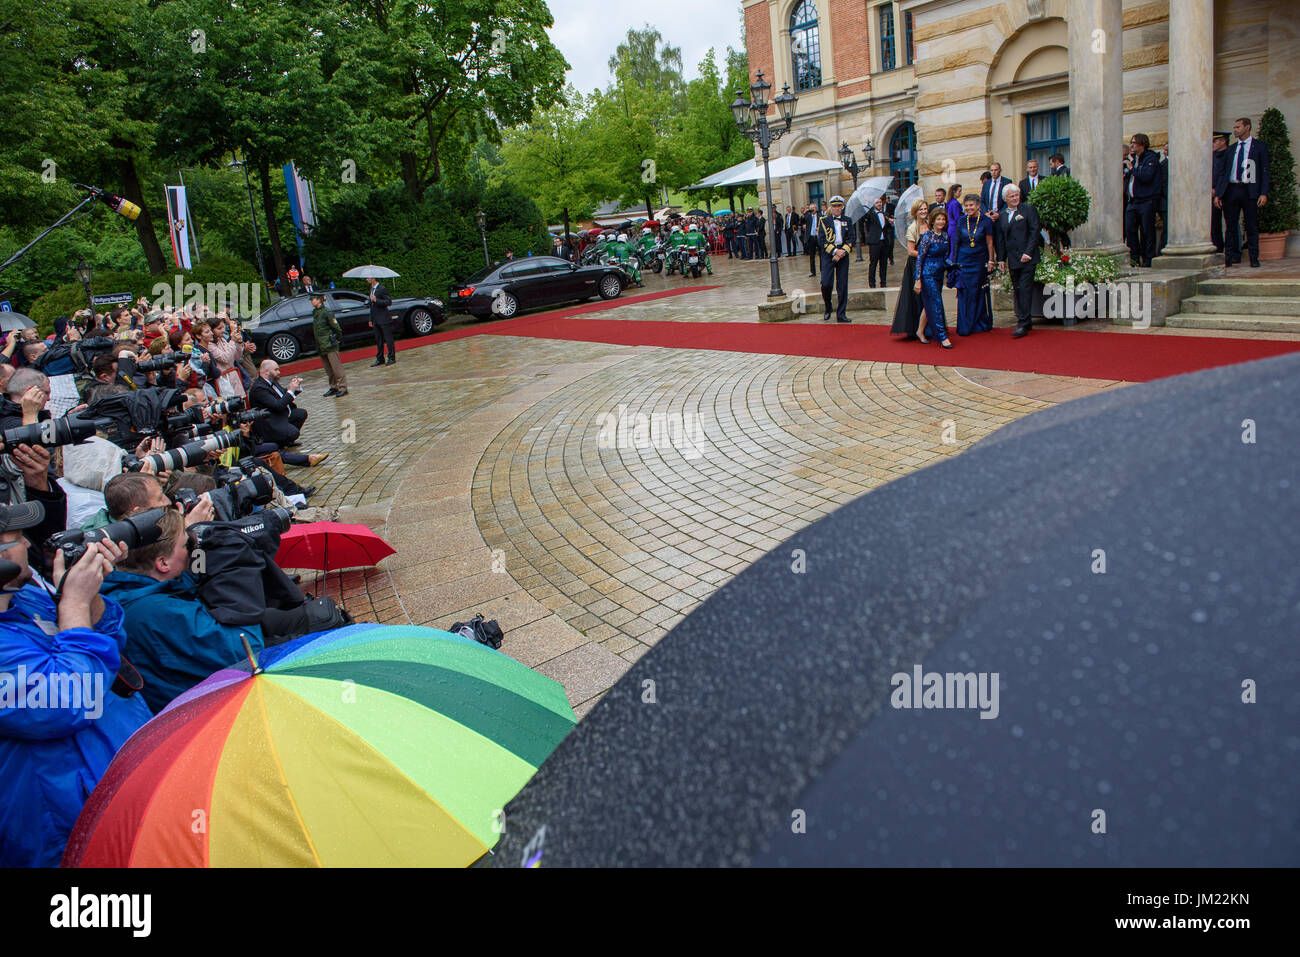 Bayreuth, Germany. 25th July, 2017. dpatop - Queen Silvia of Sweden (blue dress), and the wife of Bavarian premier Seehofer, Karin Seehofer, are greeted by mayoress of Bayreuth Brigitte Merk-Erbe and her husband Thomas Erbe at the opening of the Bayreuth Festival 2017 in Bayreuth, Germany, 25 July 2017. The festival opens with the opera 'Die Meistersinger von Nuernberg' (The Master-Singers of Nuremberg). Photo: Nicolas Armer/dpa/Alamy Live News Stock Photo